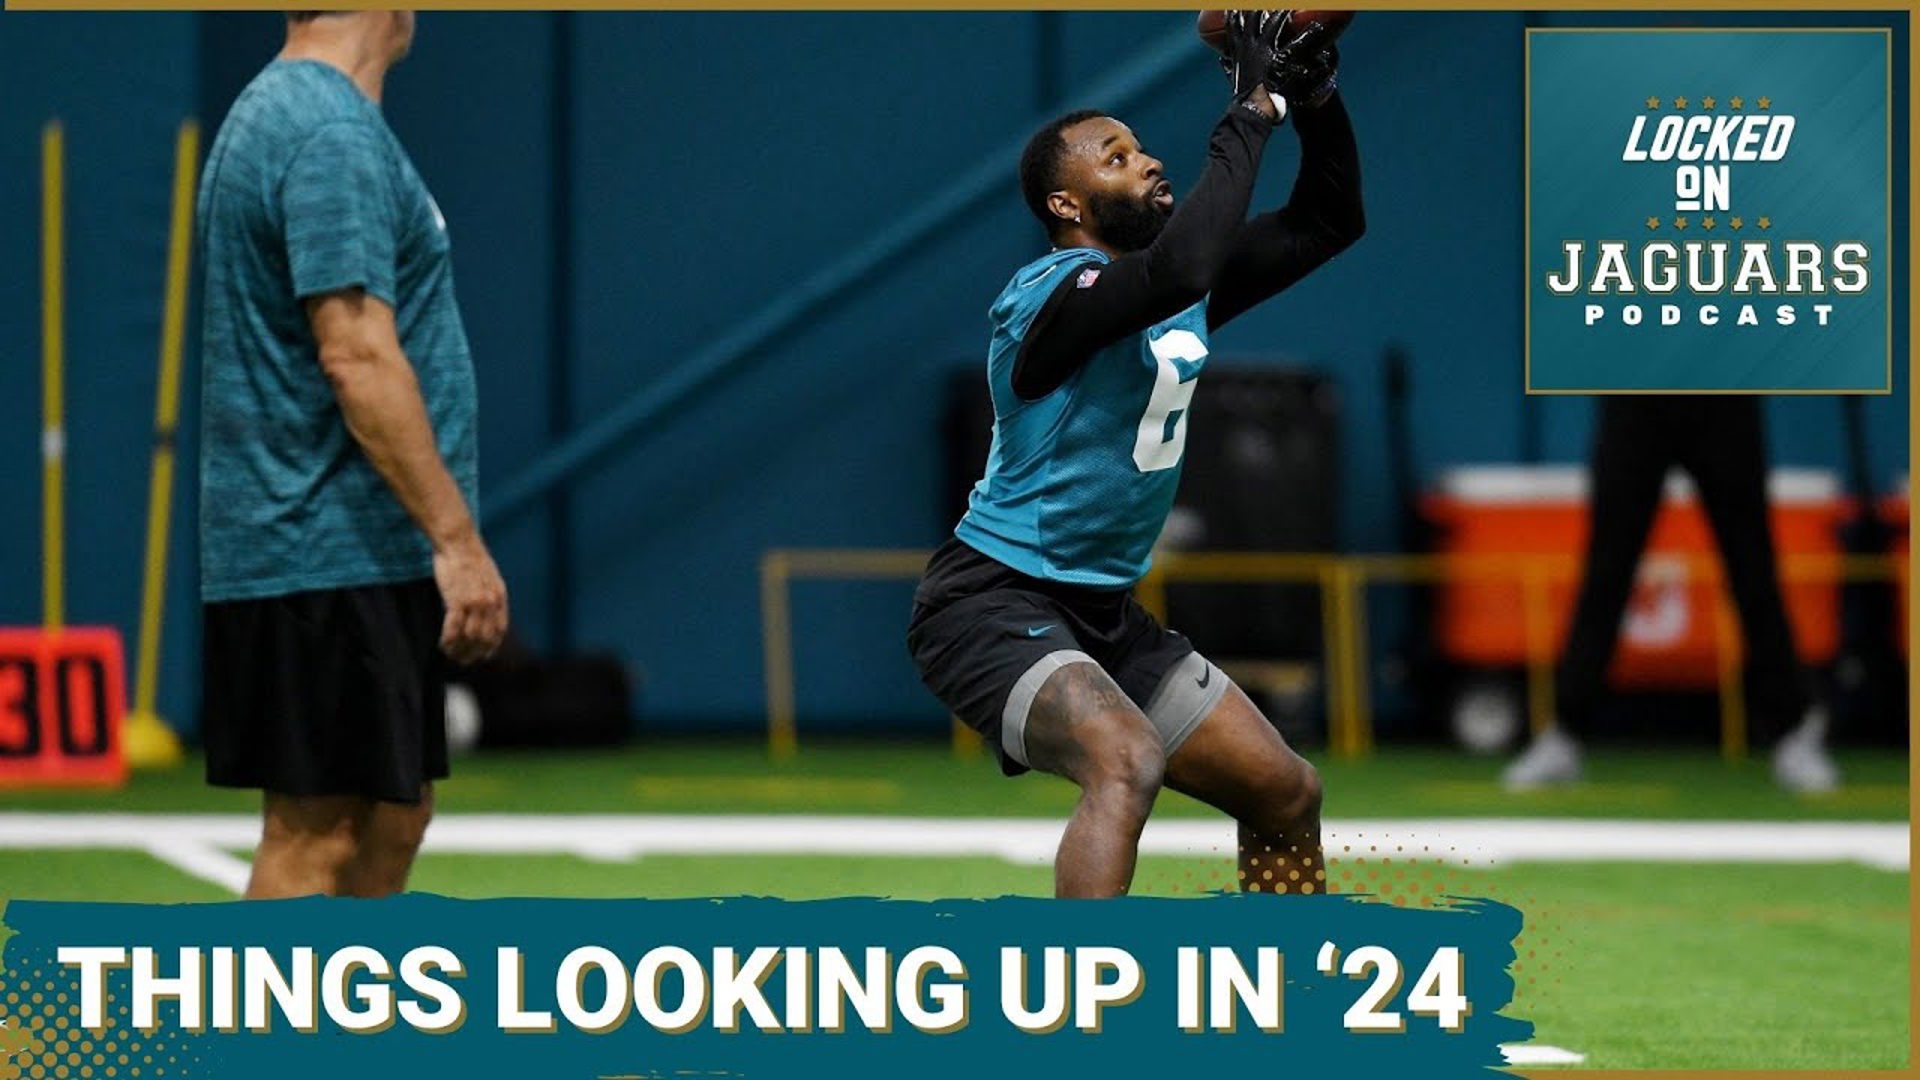 Looking Up On And Off Field For The Jacksonville Jaguars